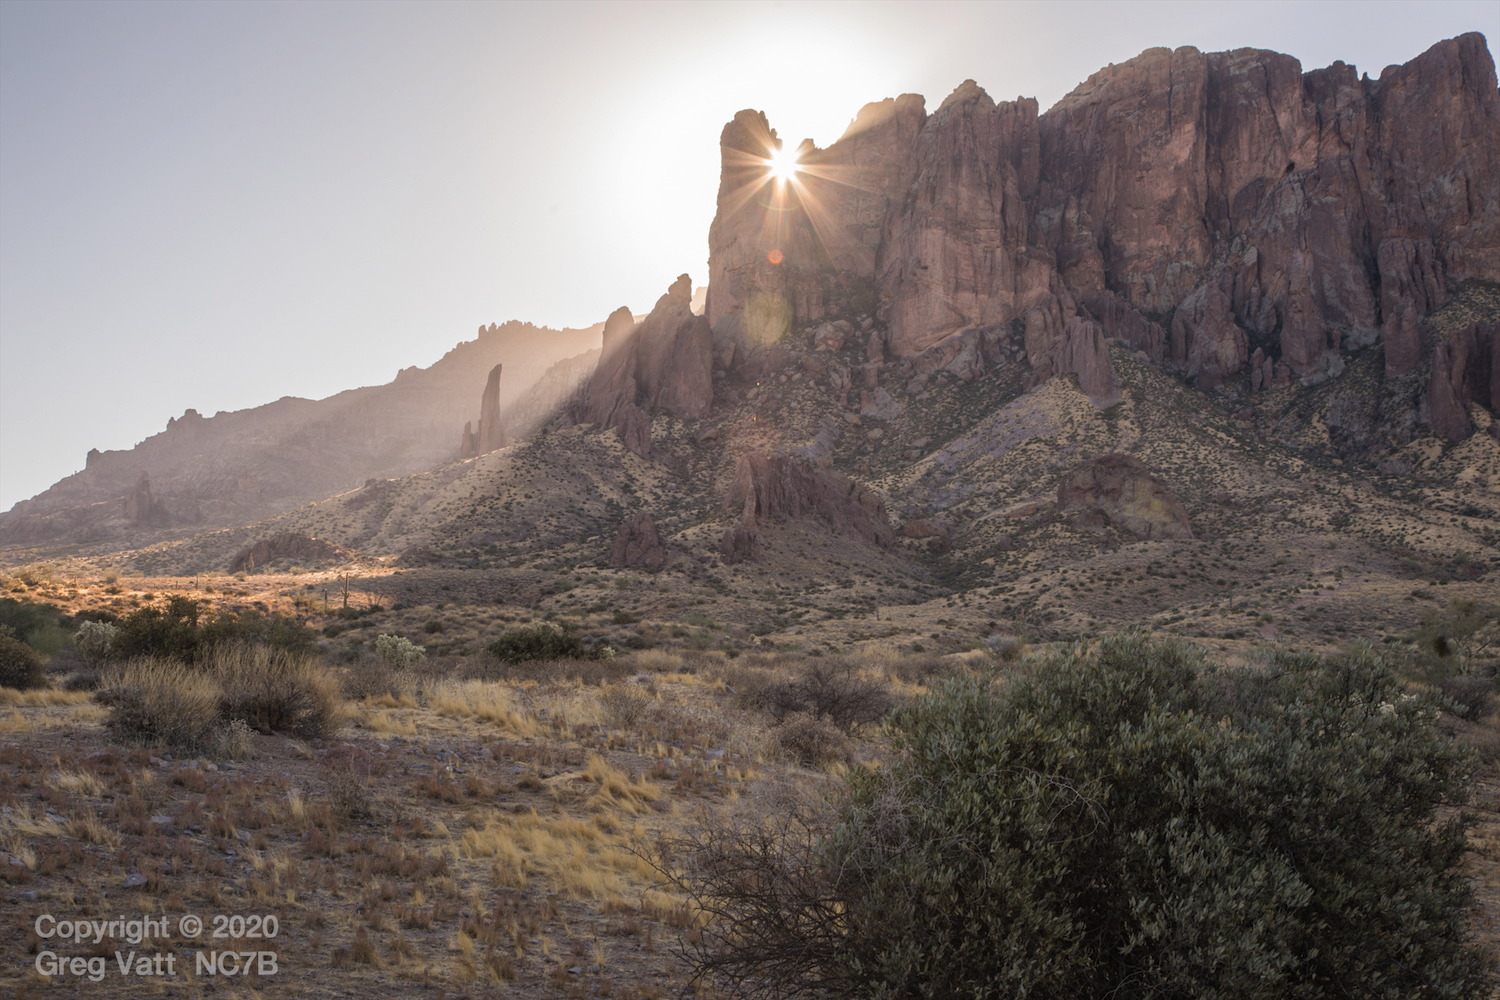 The morning sun is peaking out behind the Superstition Mountains.